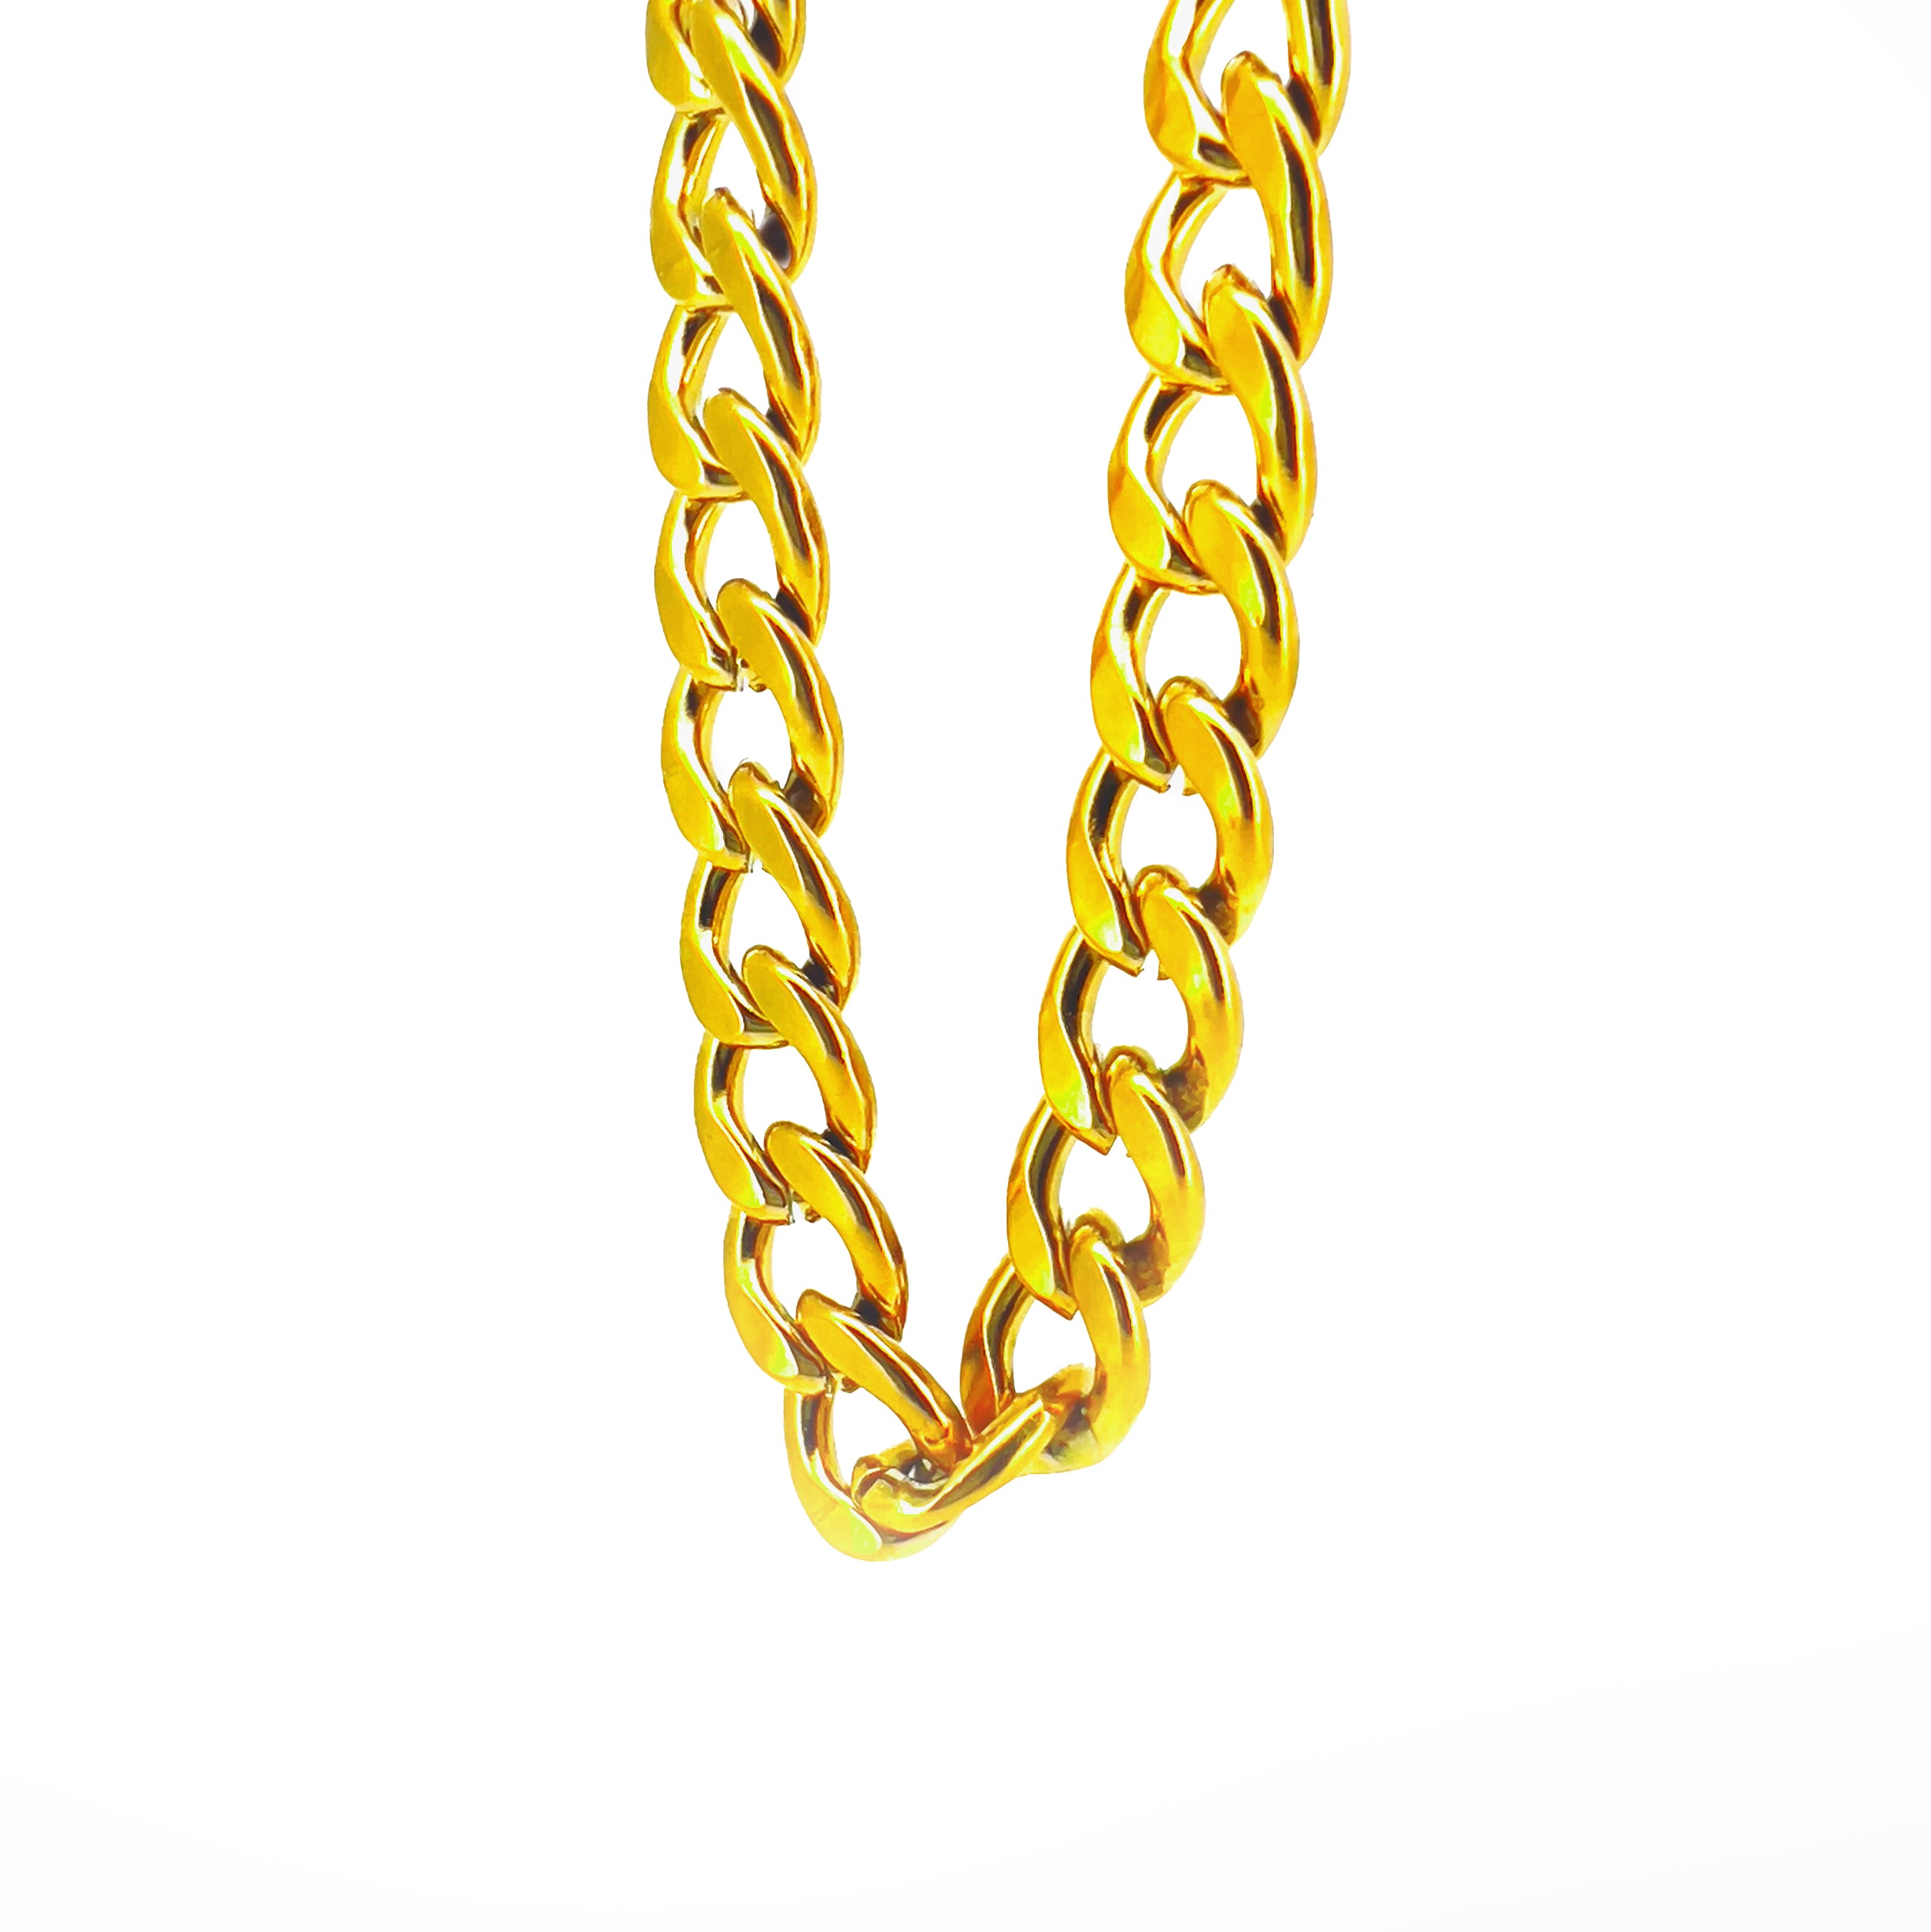 Fortunato Stainless Steel Curb Chain Necklace